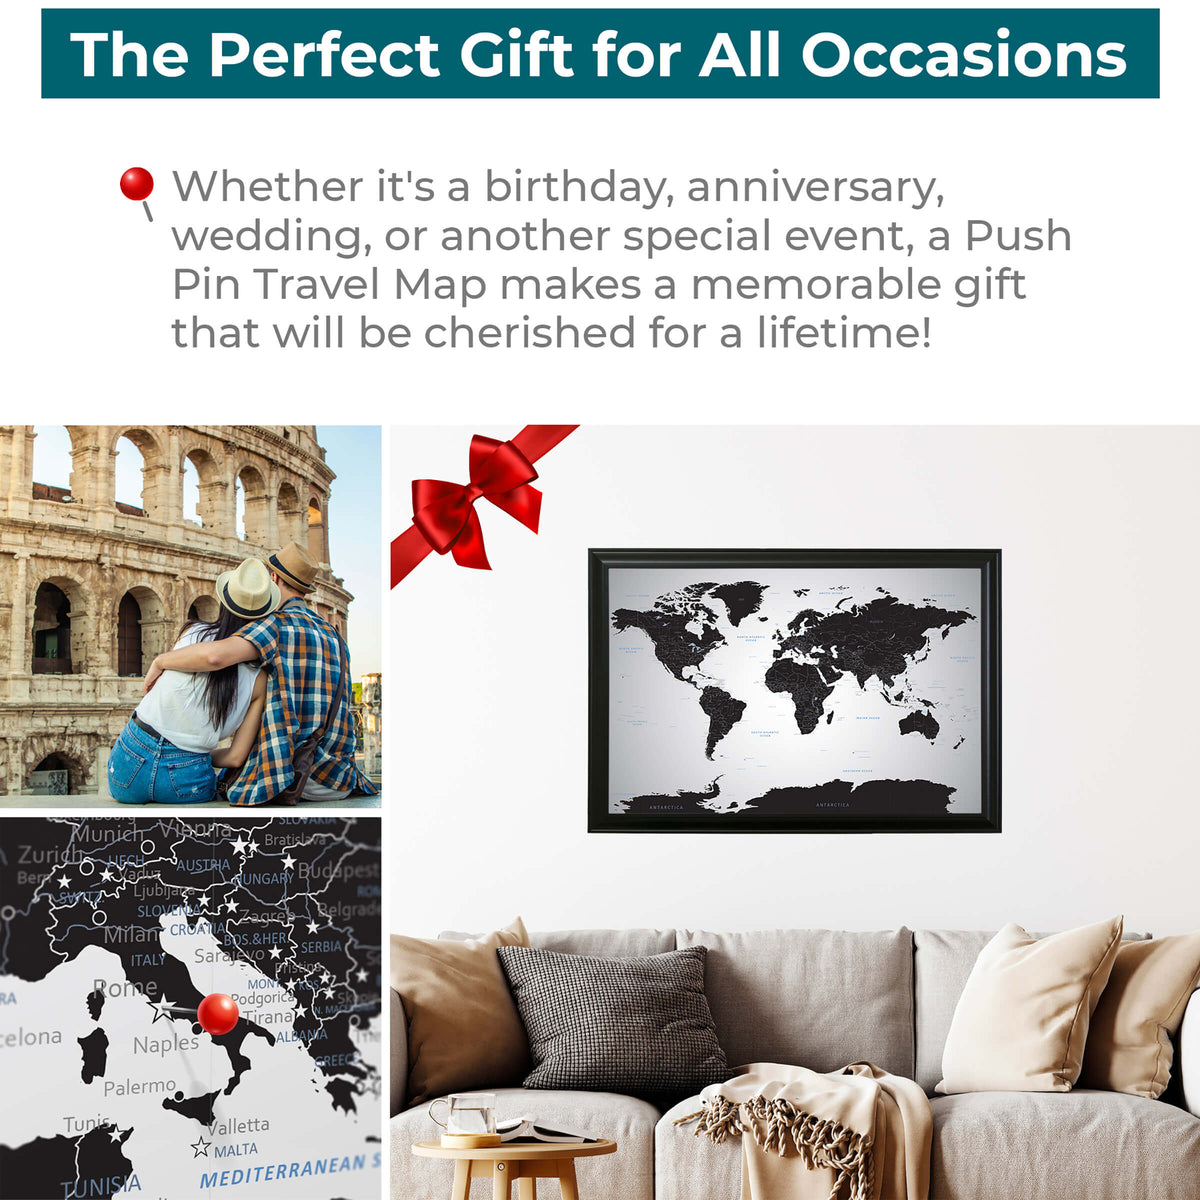 Black Ice World Push Pin Travel Maps - The Perfect Gift